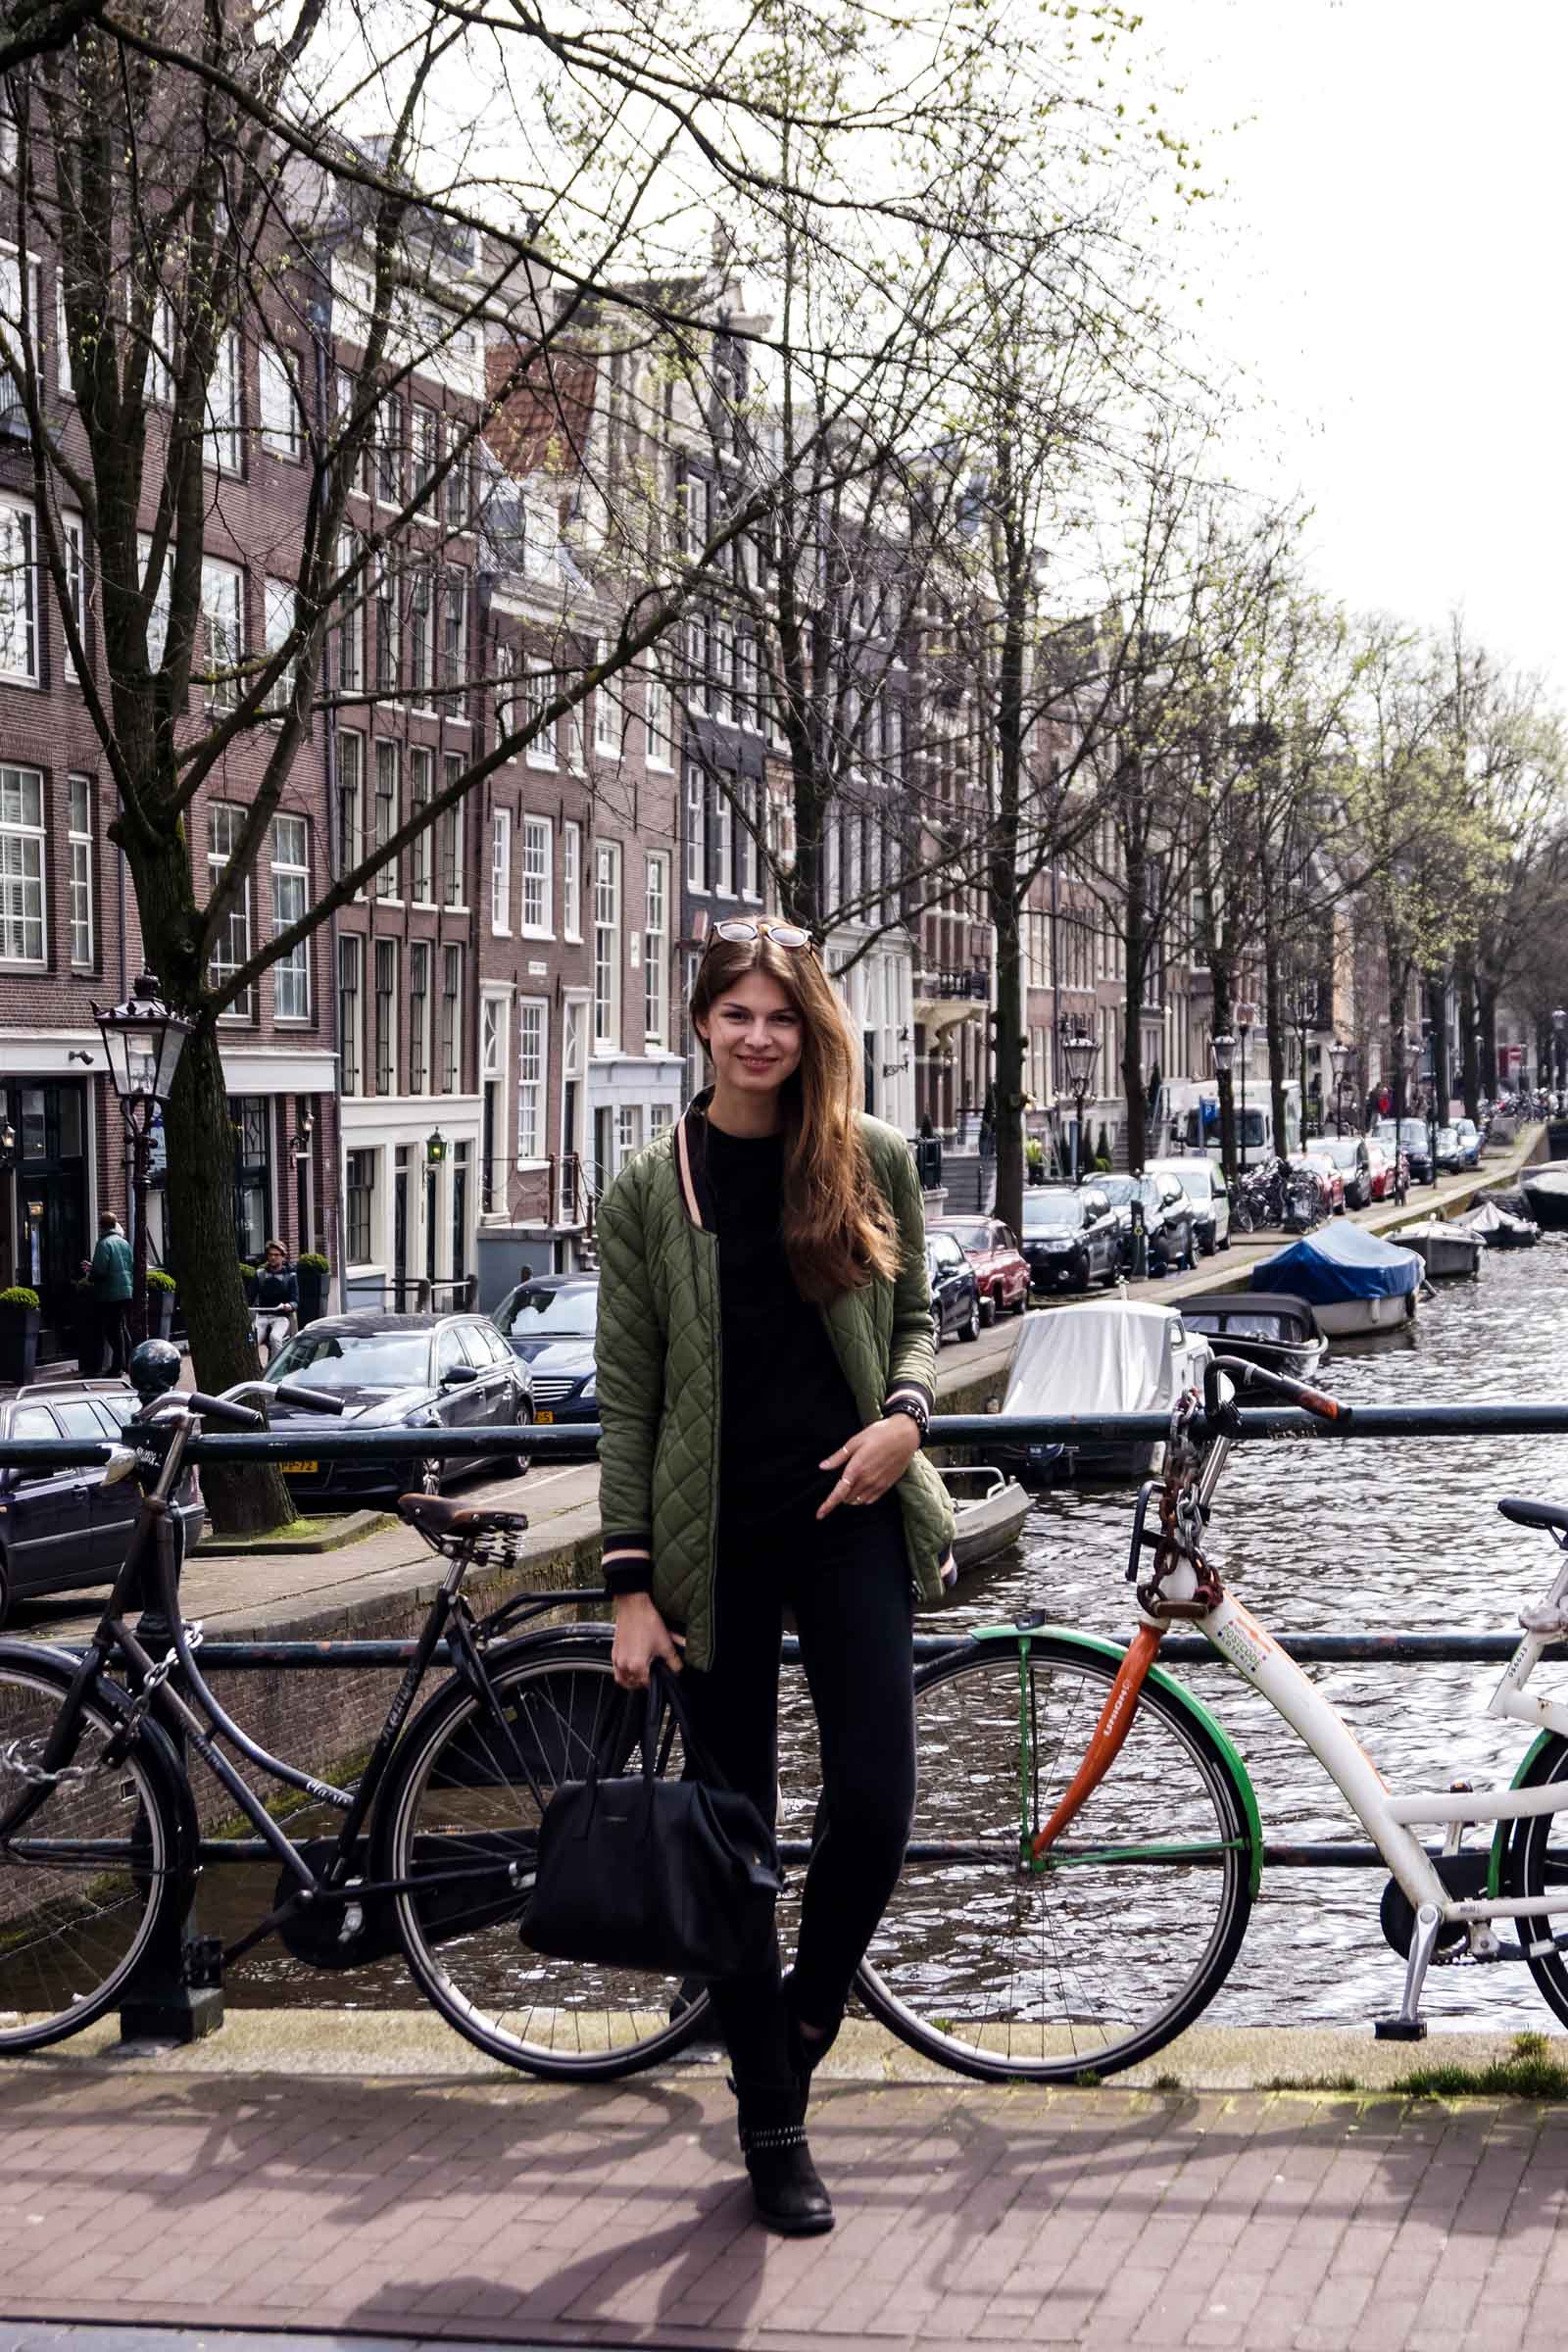 Amsterdam Outfit #2 - All black and green bomber jacket